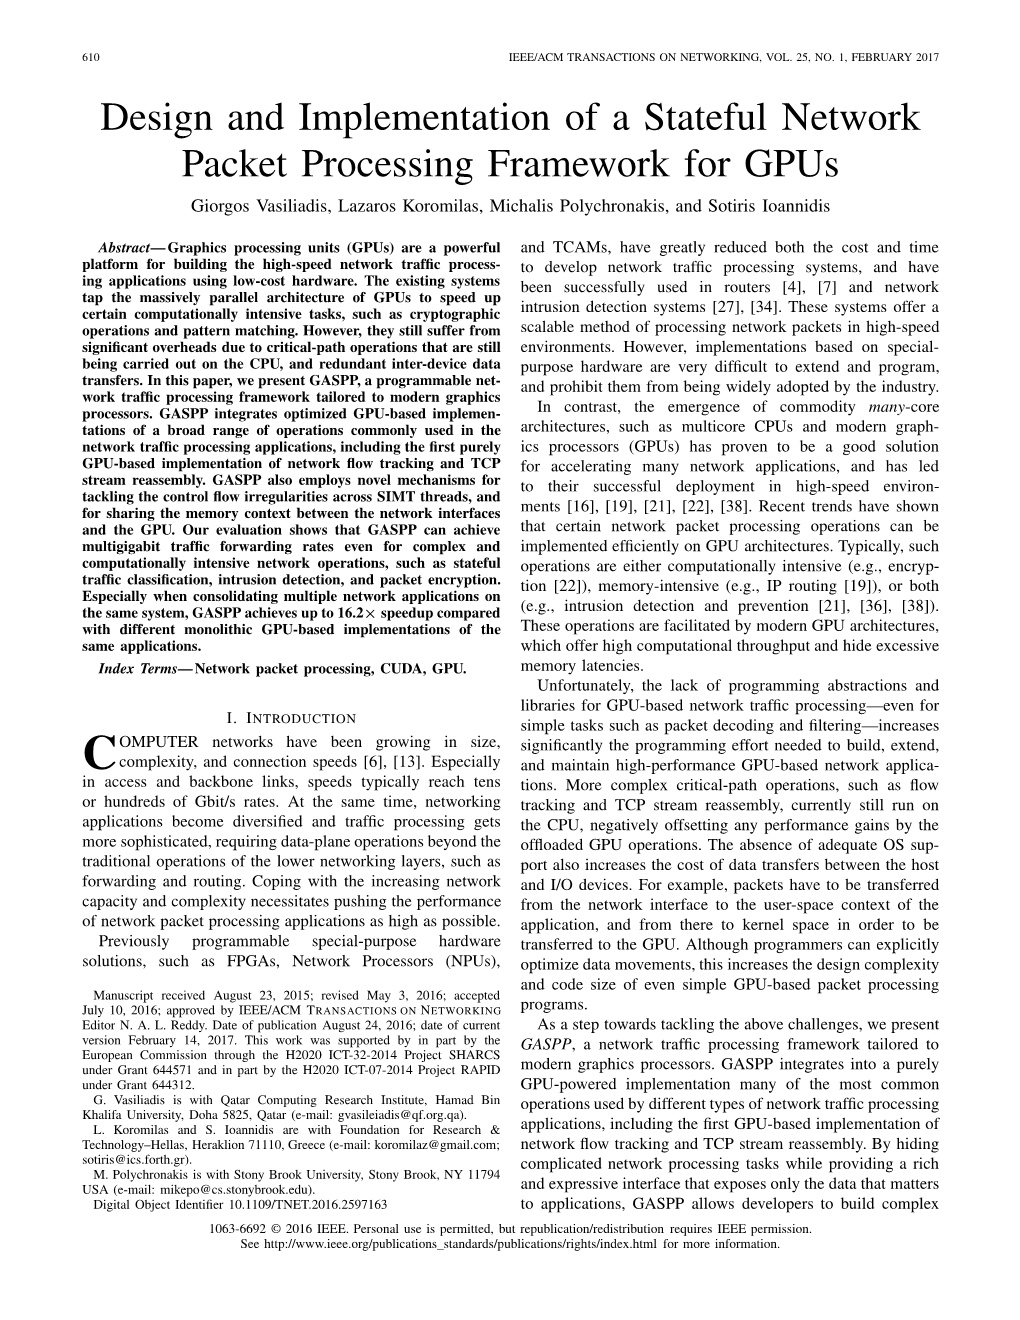 Design and Implementation of a Stateful Network Packet Processing